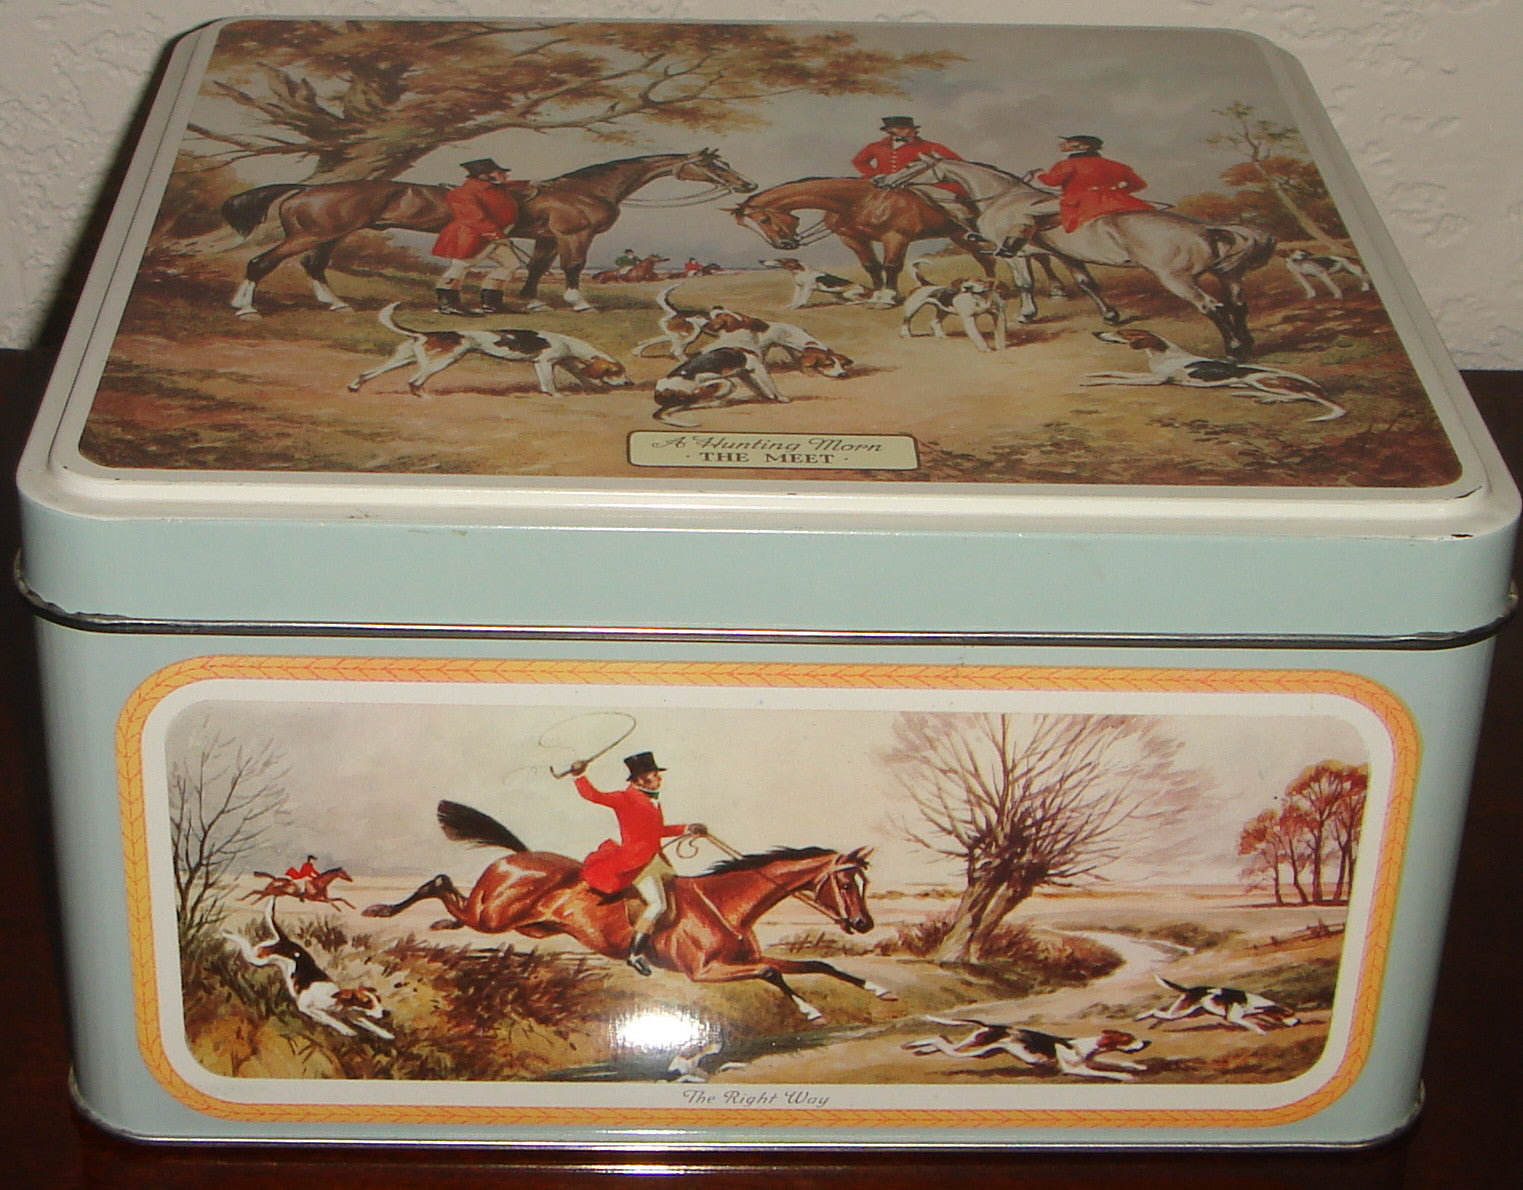 The Meet English Hunting Scenes Carr's Biscuit Tin. – Tupper's